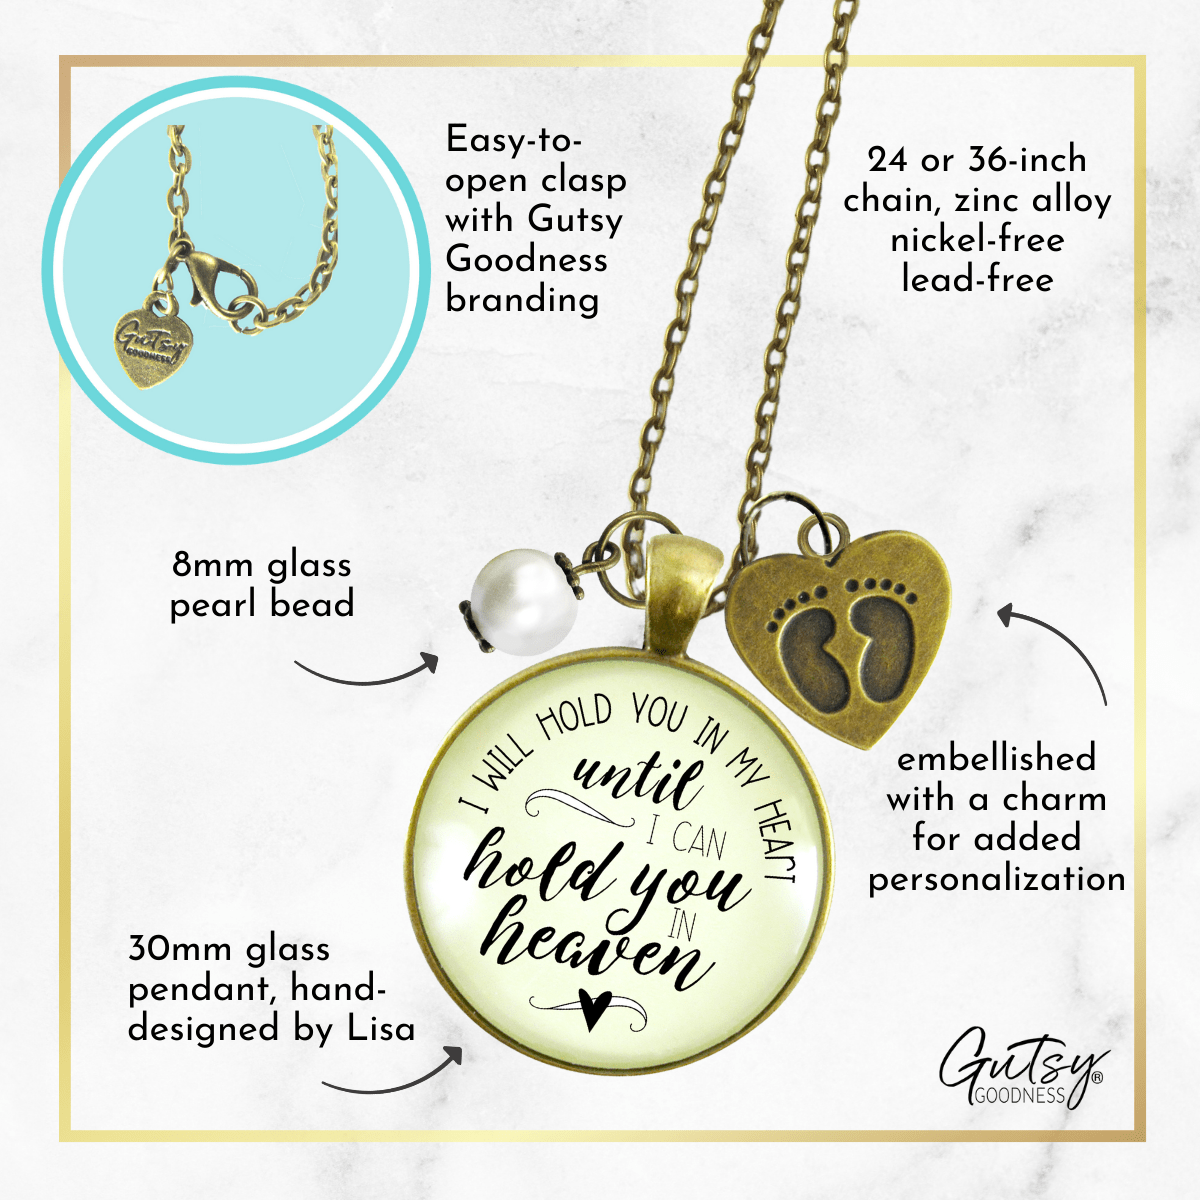 Gutsy Goodness Miscarriage Necklace Hold You in Heart Baby Remembrance Jewelry Gift - Gutsy Goodness Handmade Jewelry;Miscarriage Necklace Hold You In Heart Baby Remembrance Jewelry Gift - Gutsy Goodness Handmade Jewelry Gifts